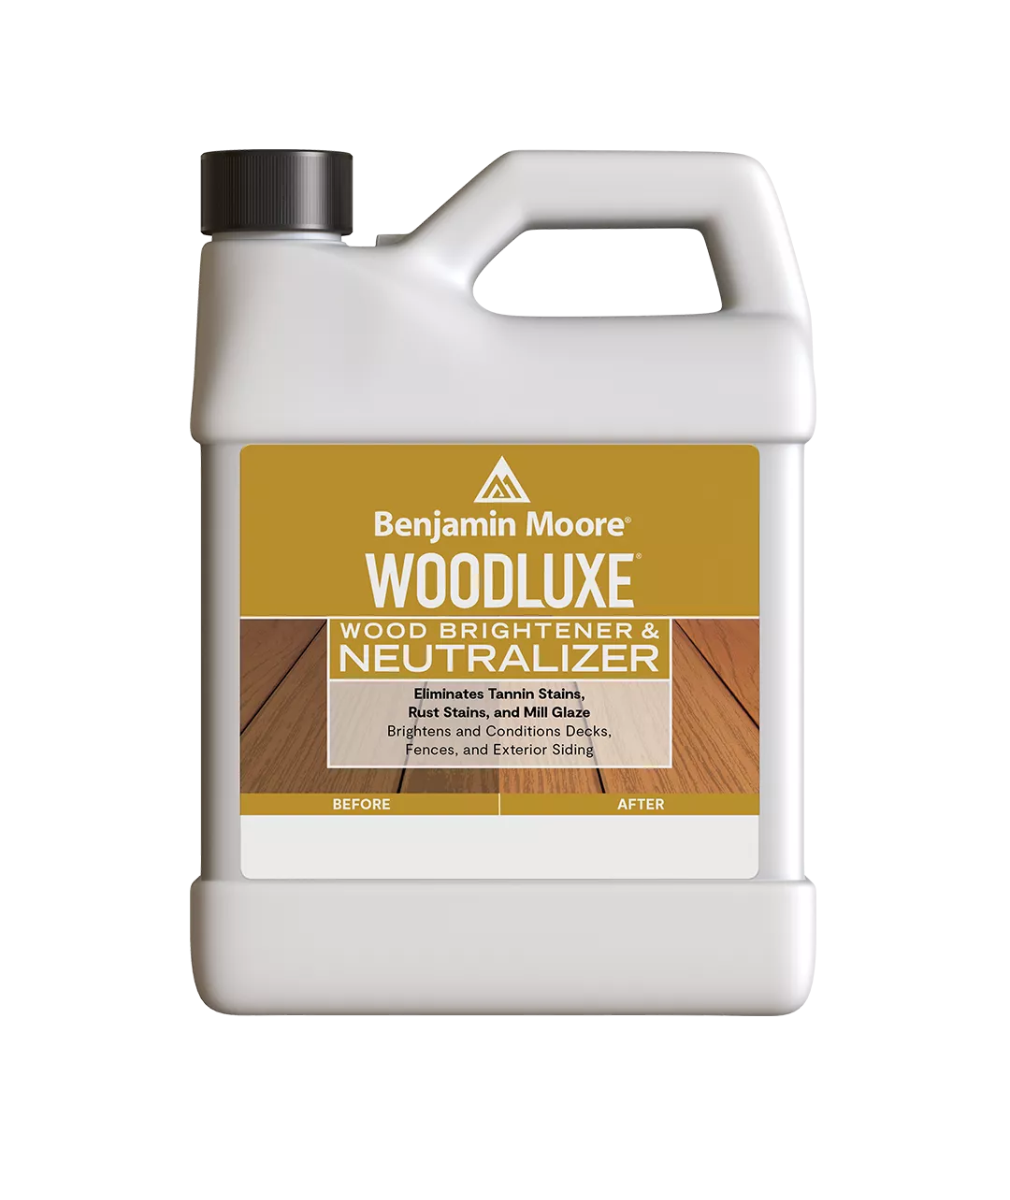 Benjamin Moore Woodluxe Wood Brightener & Neutralizer Gallon available at Southwestern Paint.